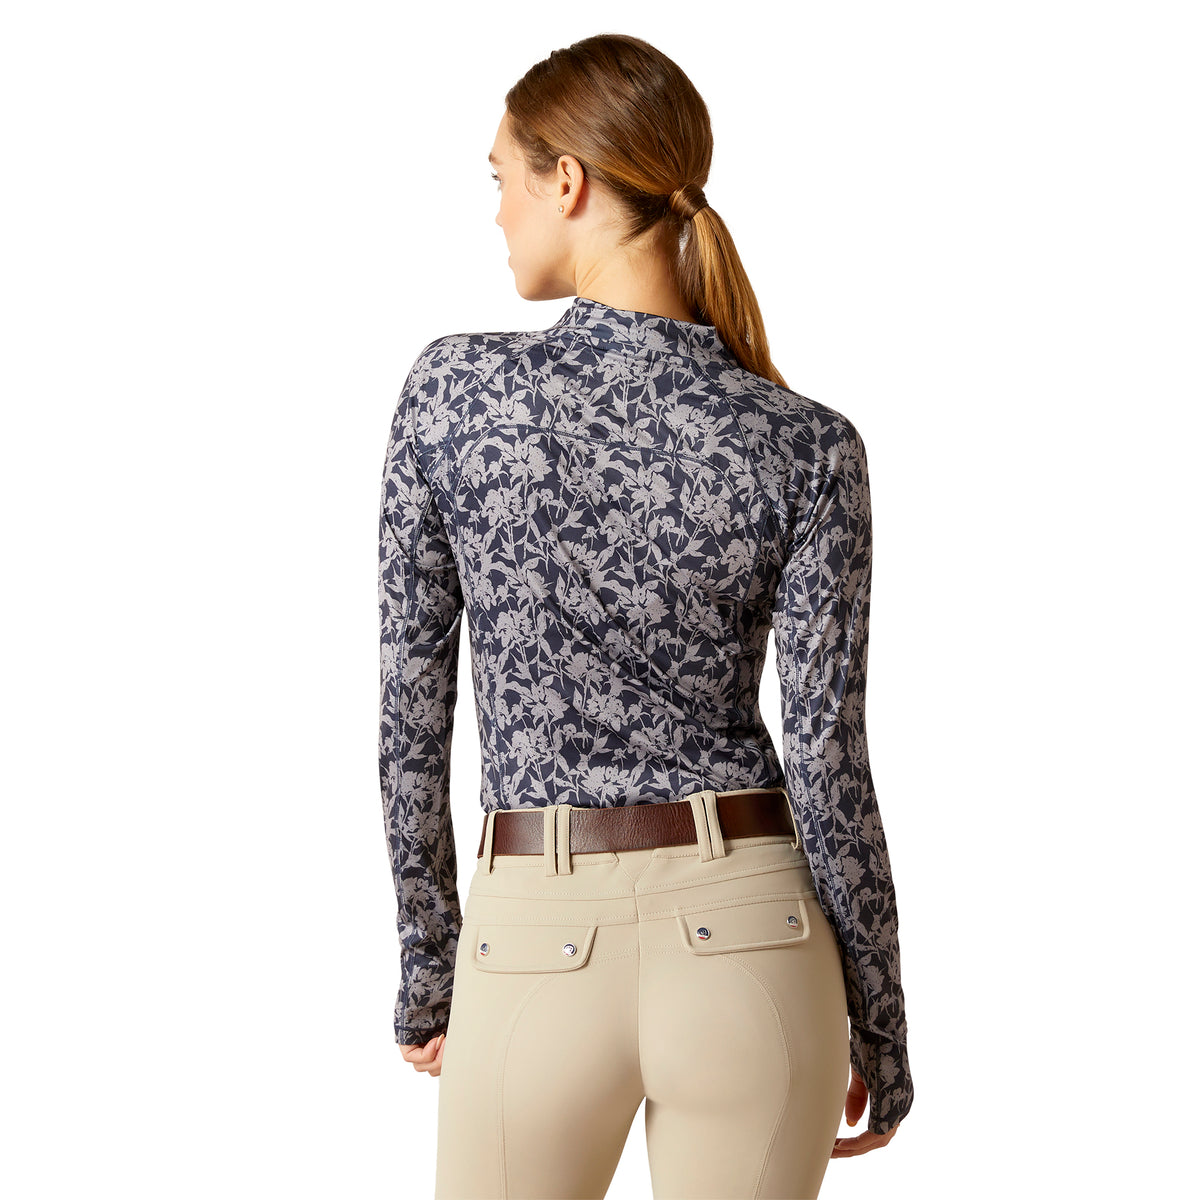 Ariat Women's Lowell Wrap Long Sleeve Base Layer